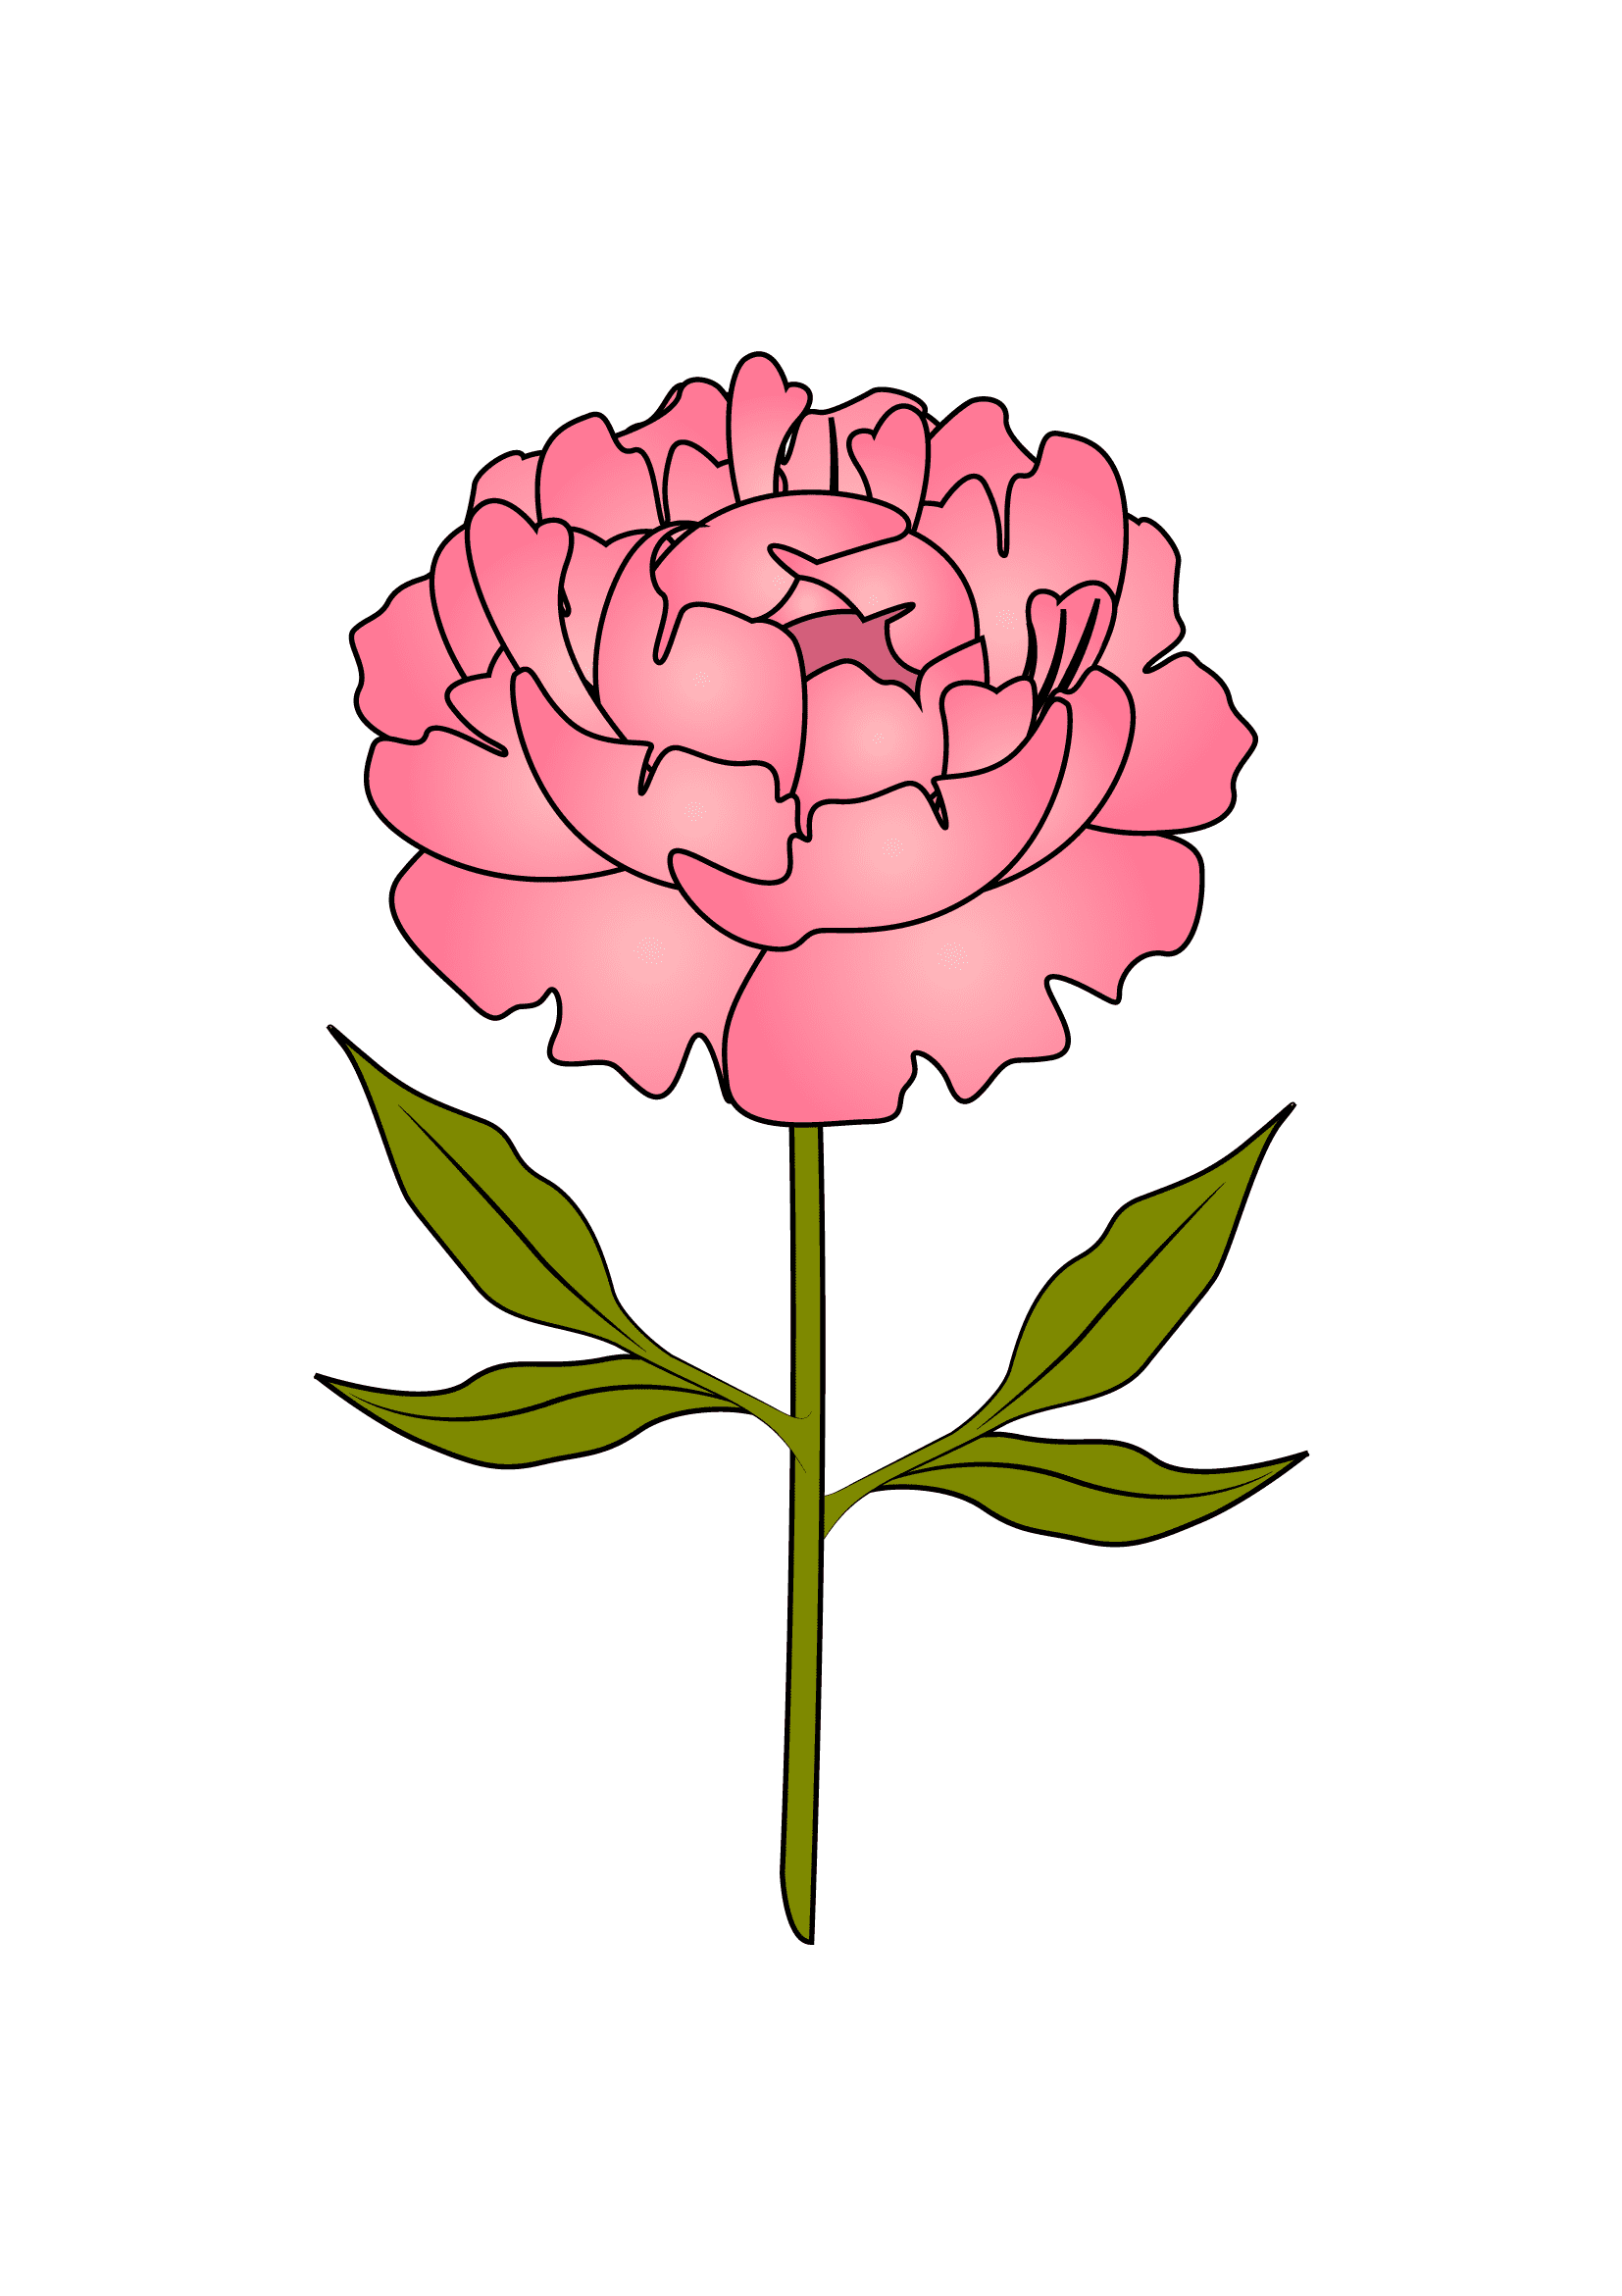 How to Draw Peonies Step by Step Printable